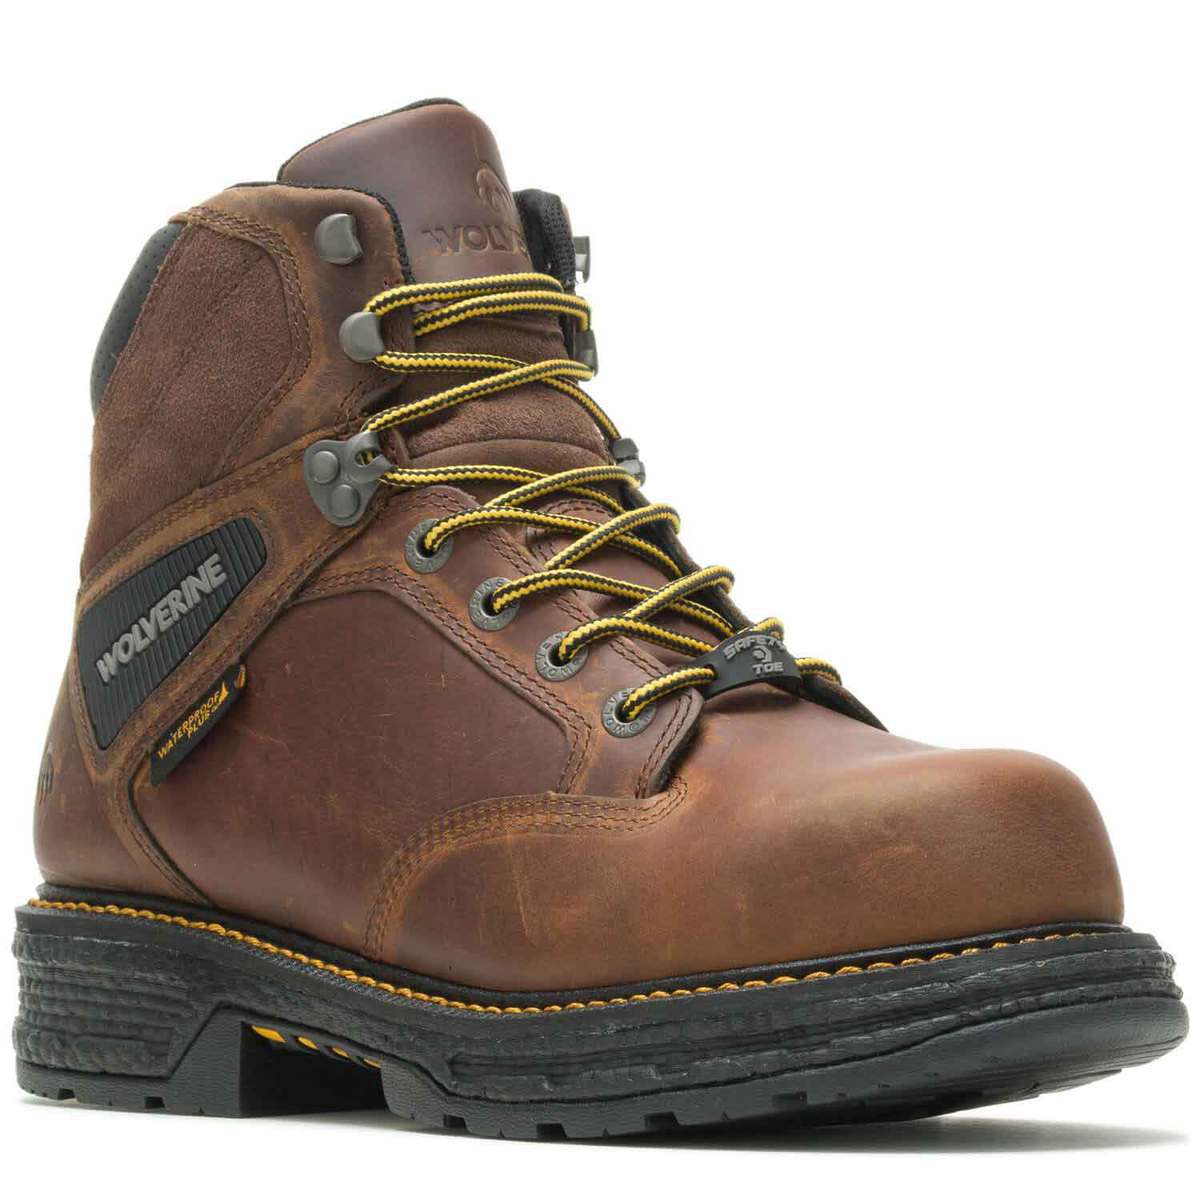 Wolverine Men's Hellcat Composite Toe Work Boots - Tobacco - Size